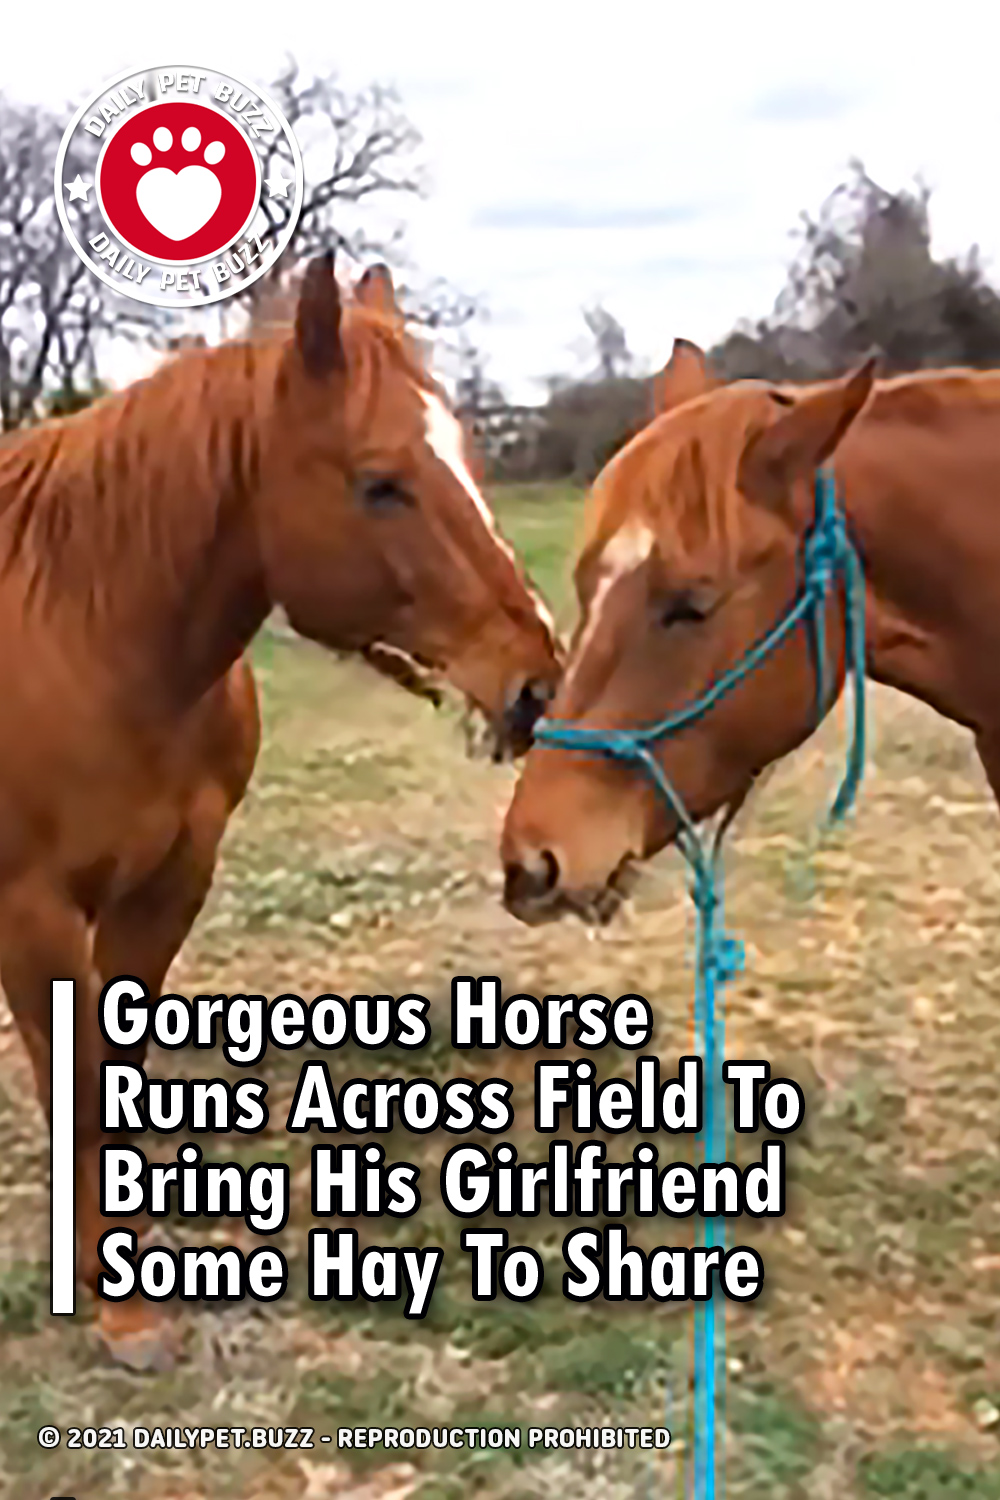 Gorgeous Horse Runs Across Field To Bring His Girlfriend Some Hay To Share